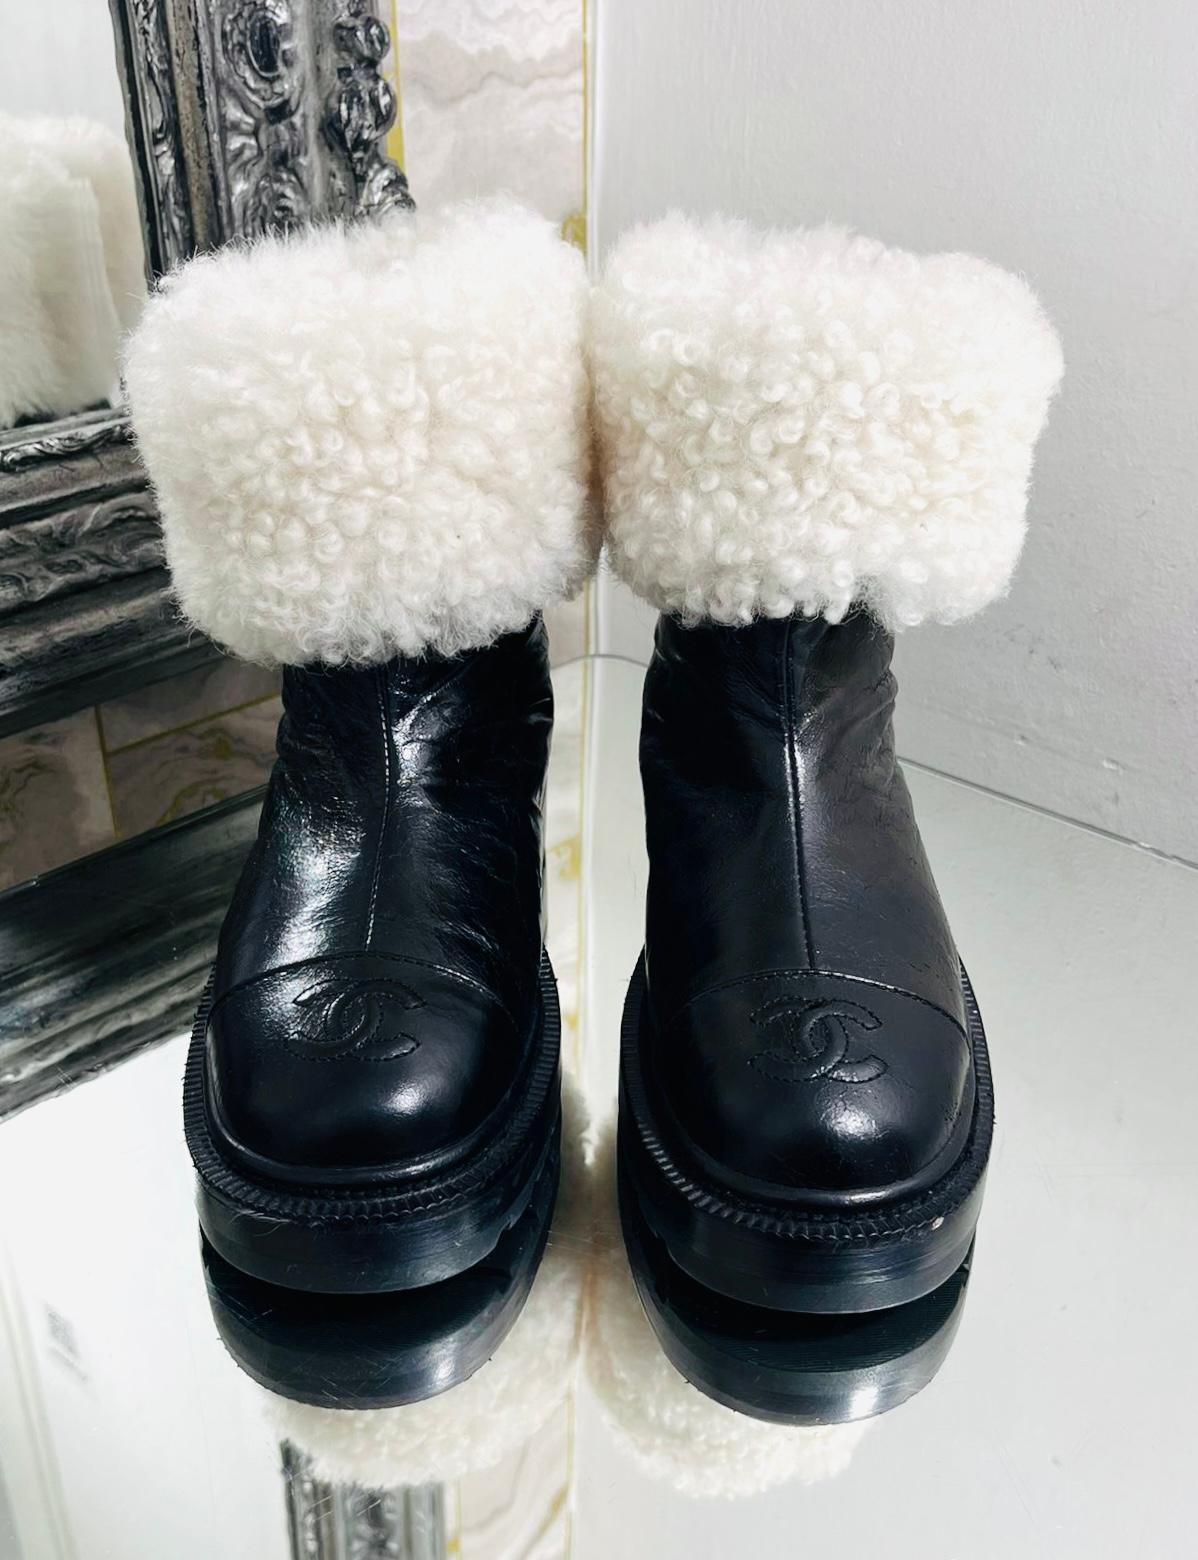 Sought after - Chanel 'CC' Logo Lambskin & Shearing Ankle Boots

Sold out worldwide - Black boots crafted from crinkled leather and detailed with 'CC' logo embroidery to the cap toe.

Featuring white shearling interior that can be worn rolled down